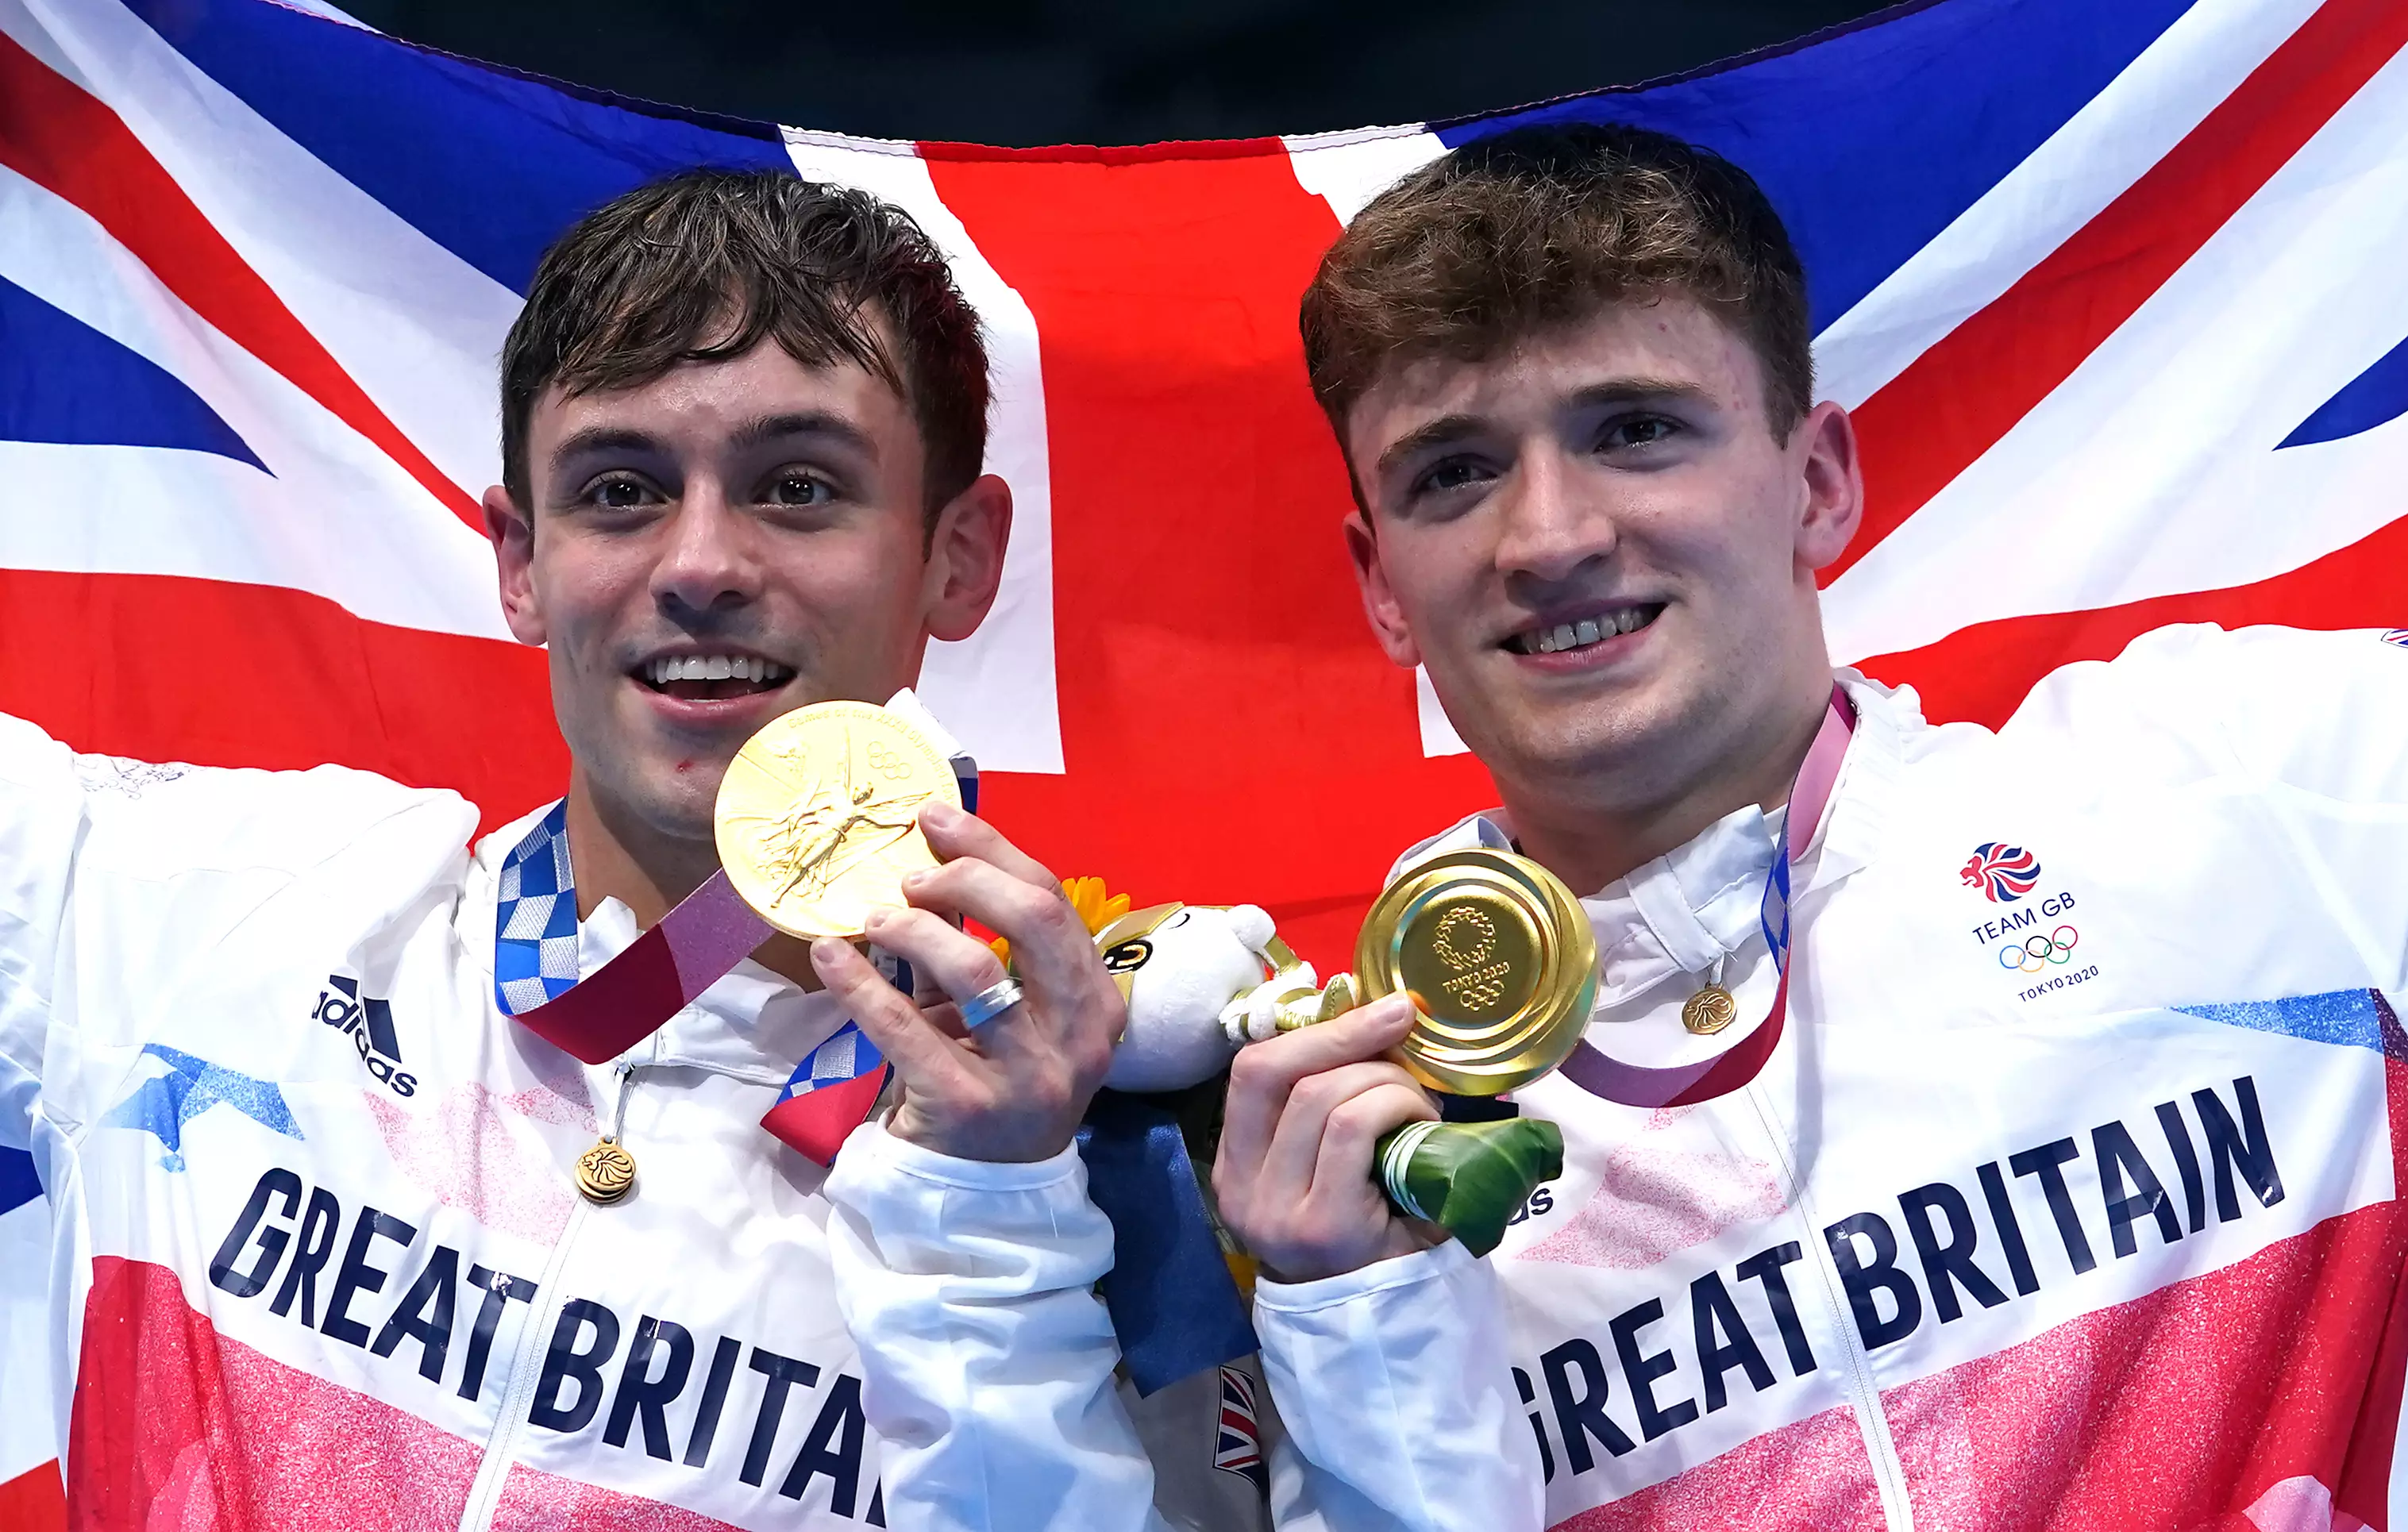 Tom Daley and Matty Lee winning gold medals for the men's 10m synchronised dive. (